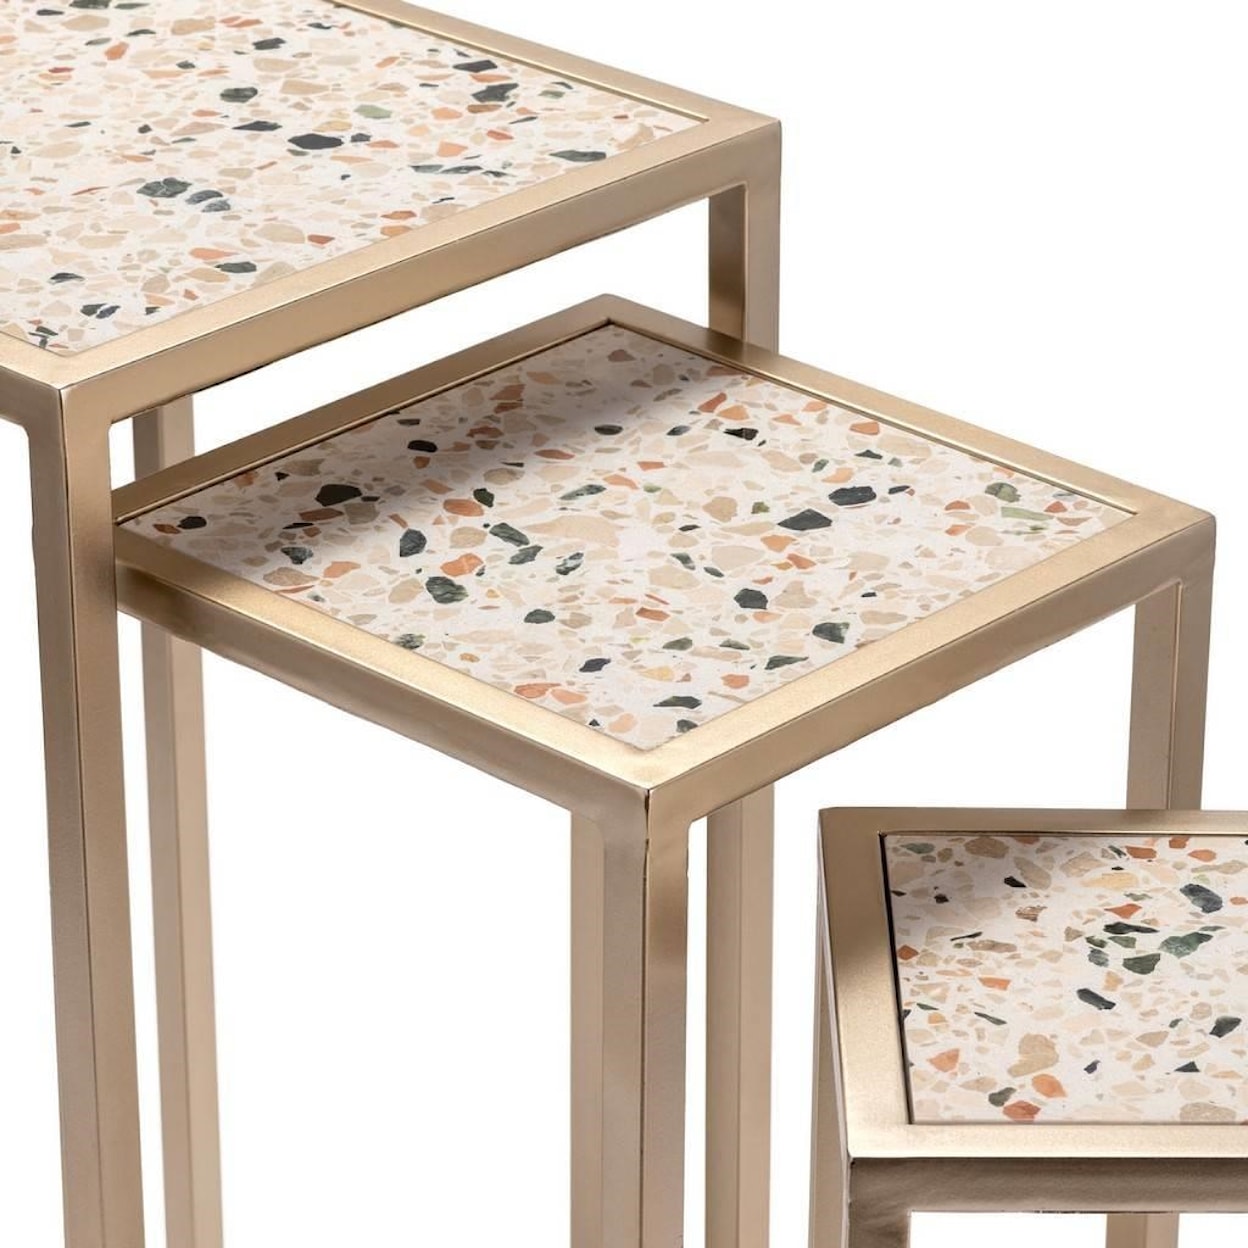 Crestview Collection EVFZR Ethniu Set of 3 Nesting Tables